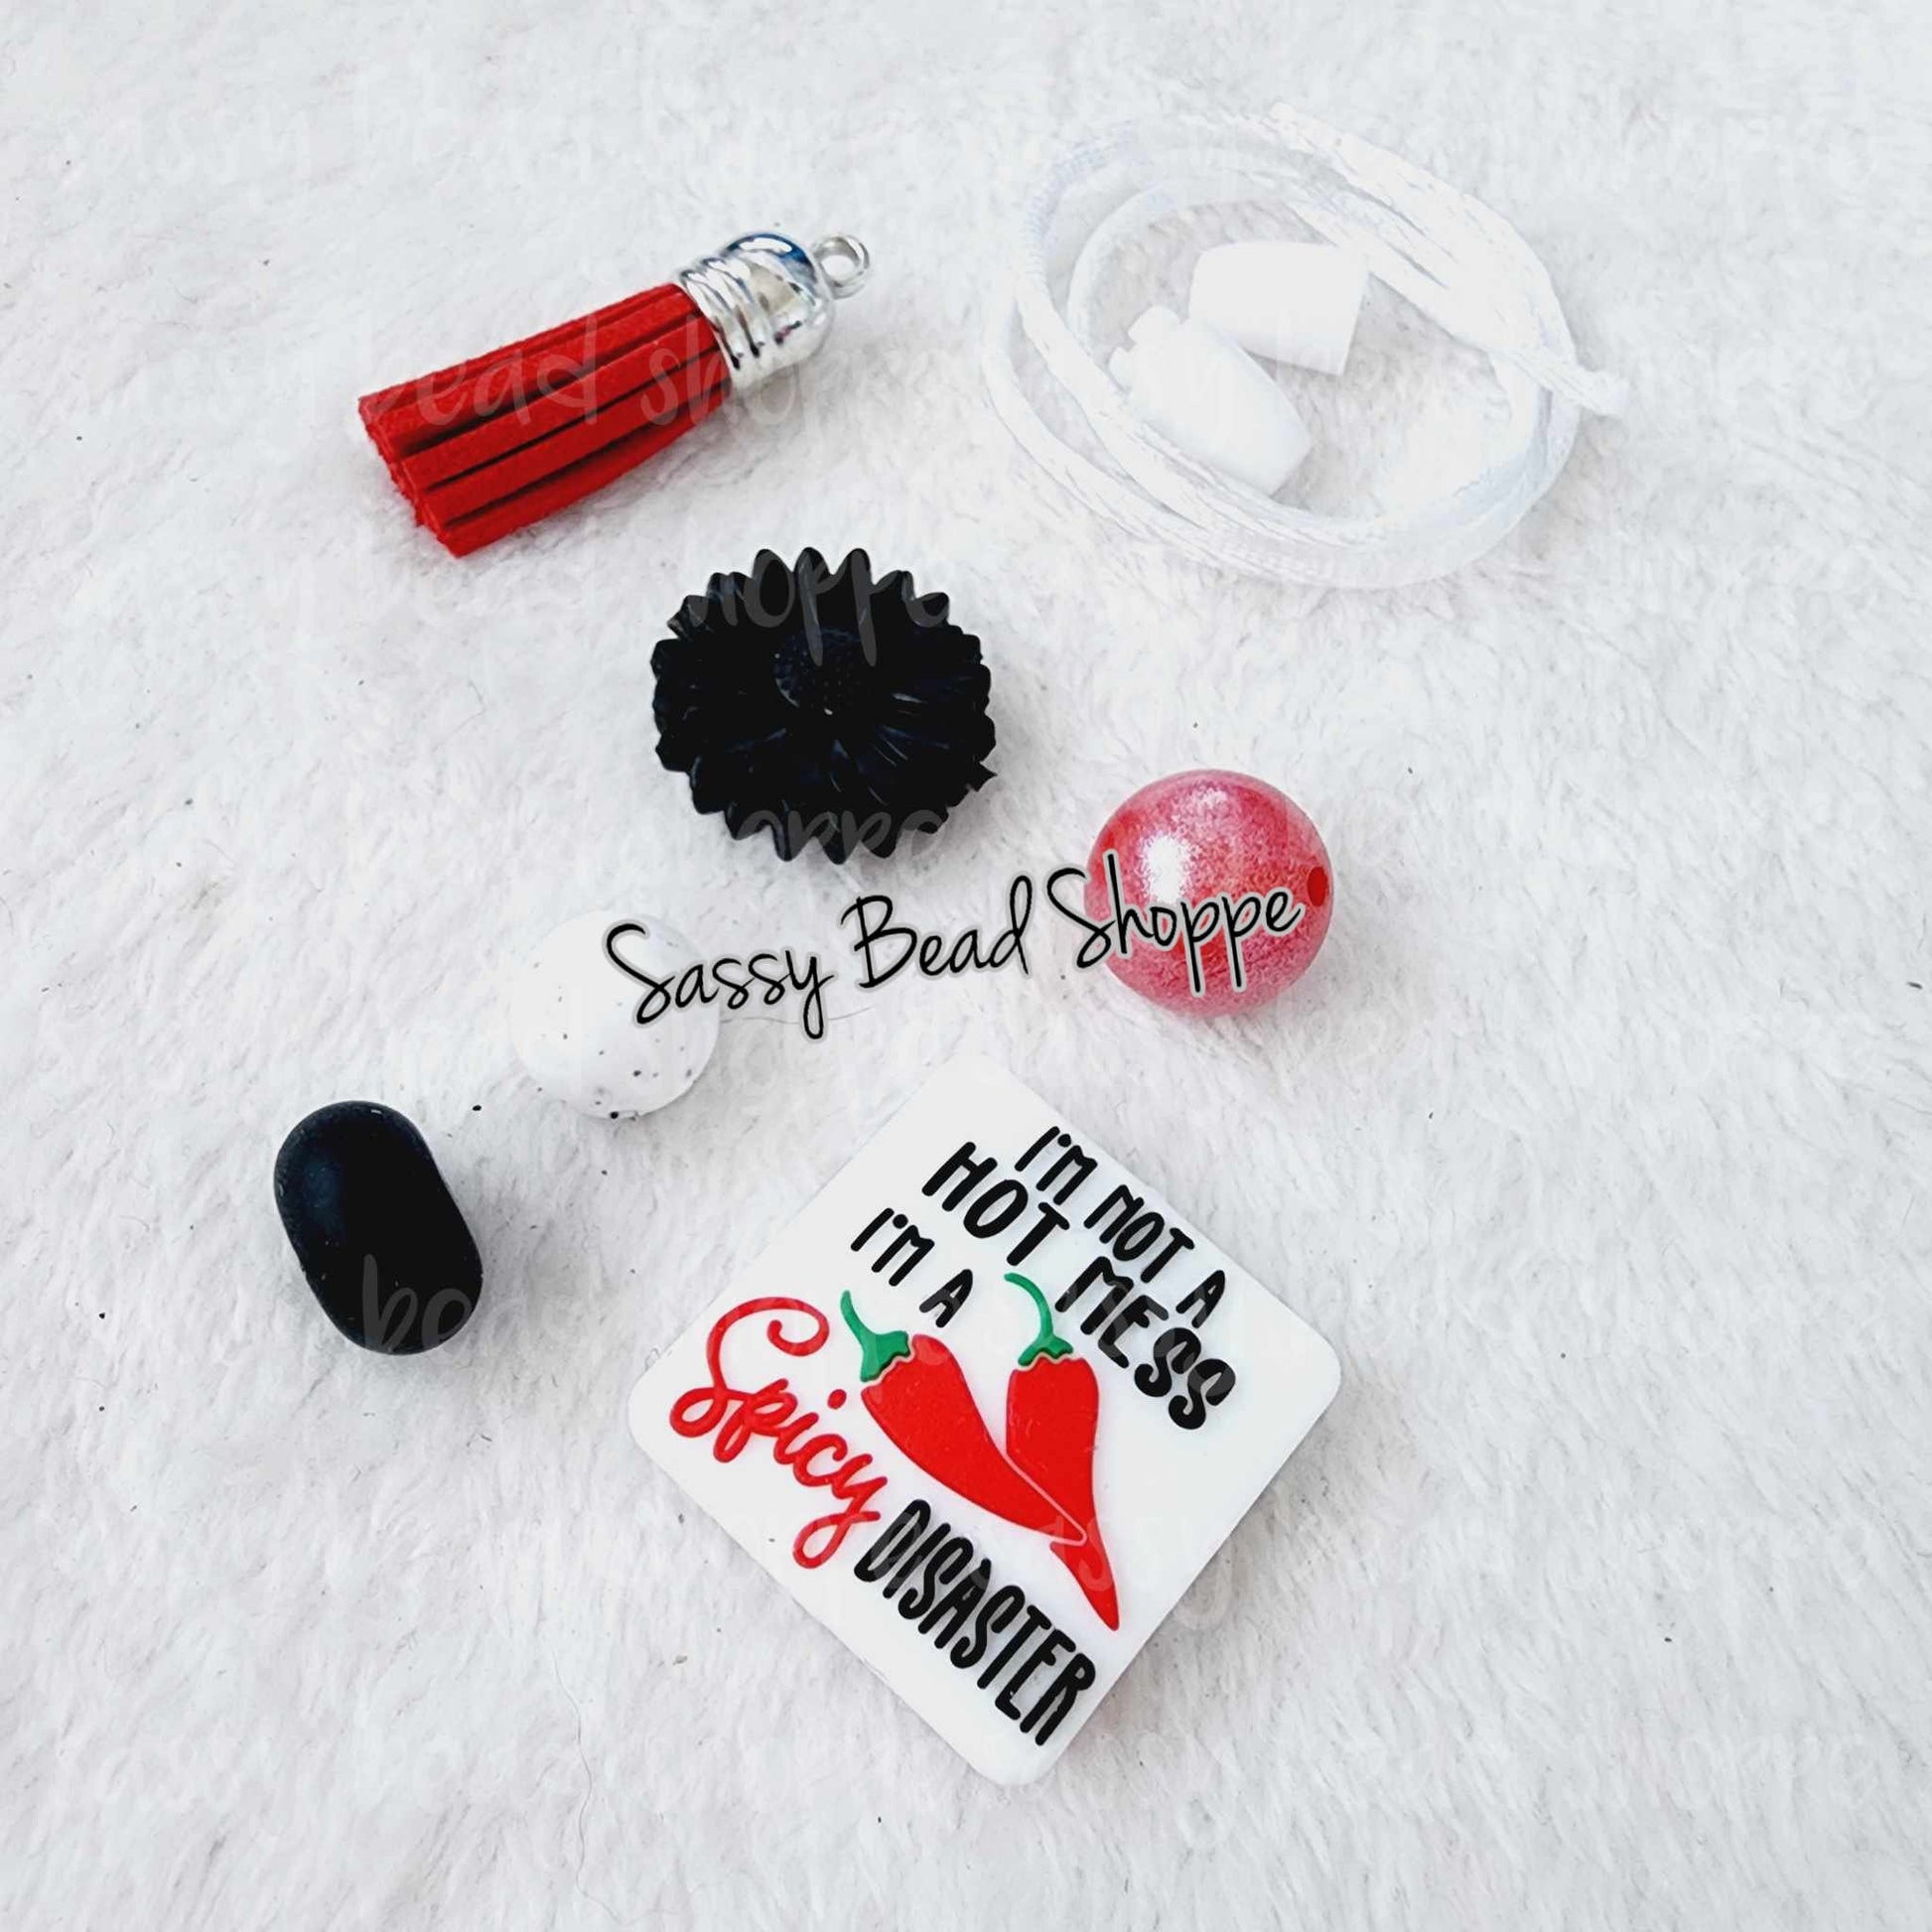 Sassy Bead Shoppe Hot Mess Express Car Charm What you will receive in your kit